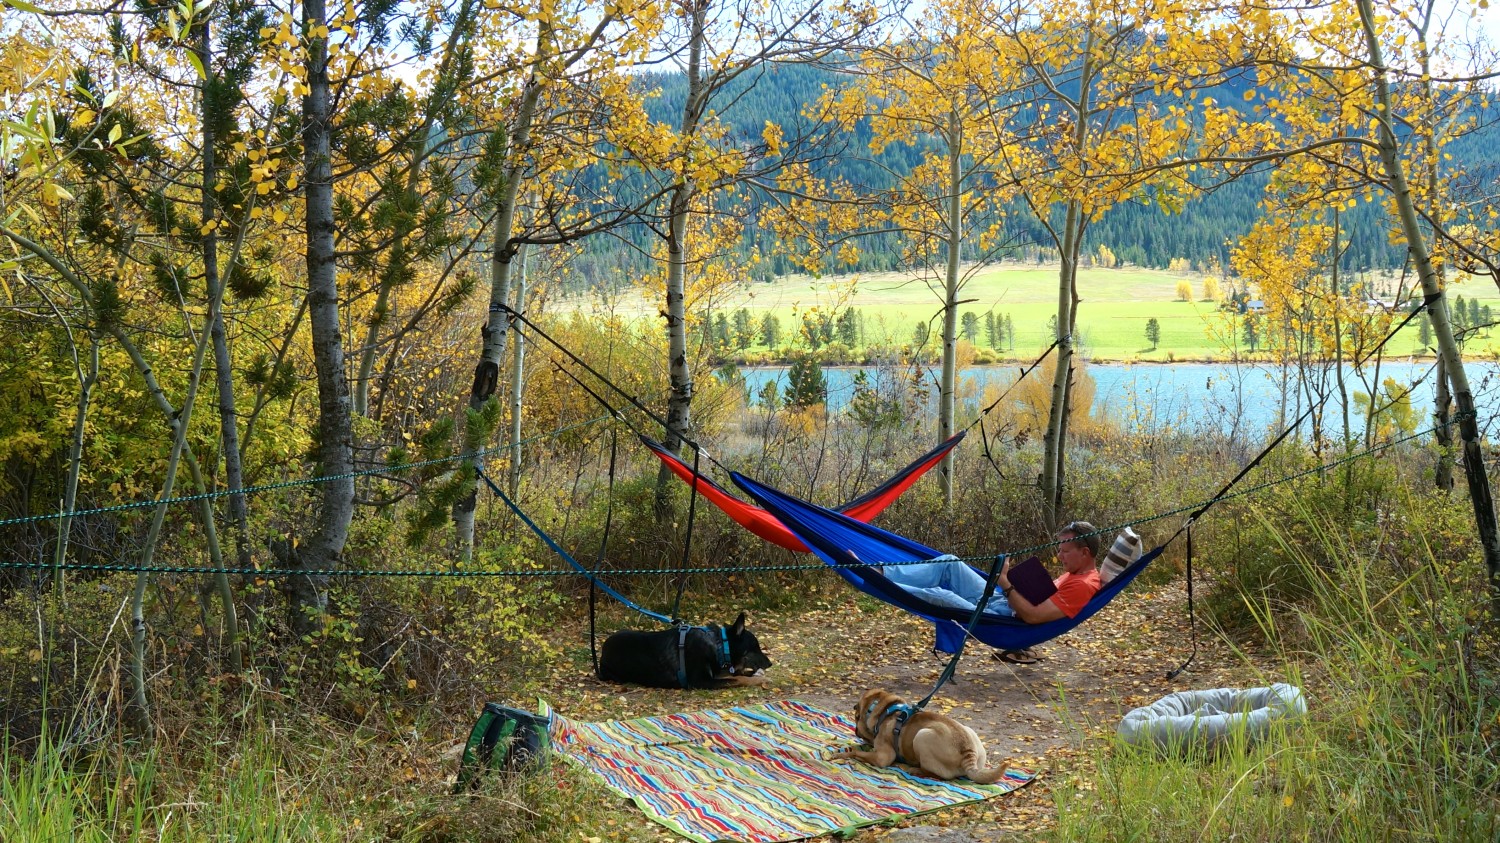 A man on a hammock and two dogs relaxing by a lake - a good activity for traveling with elderly pets